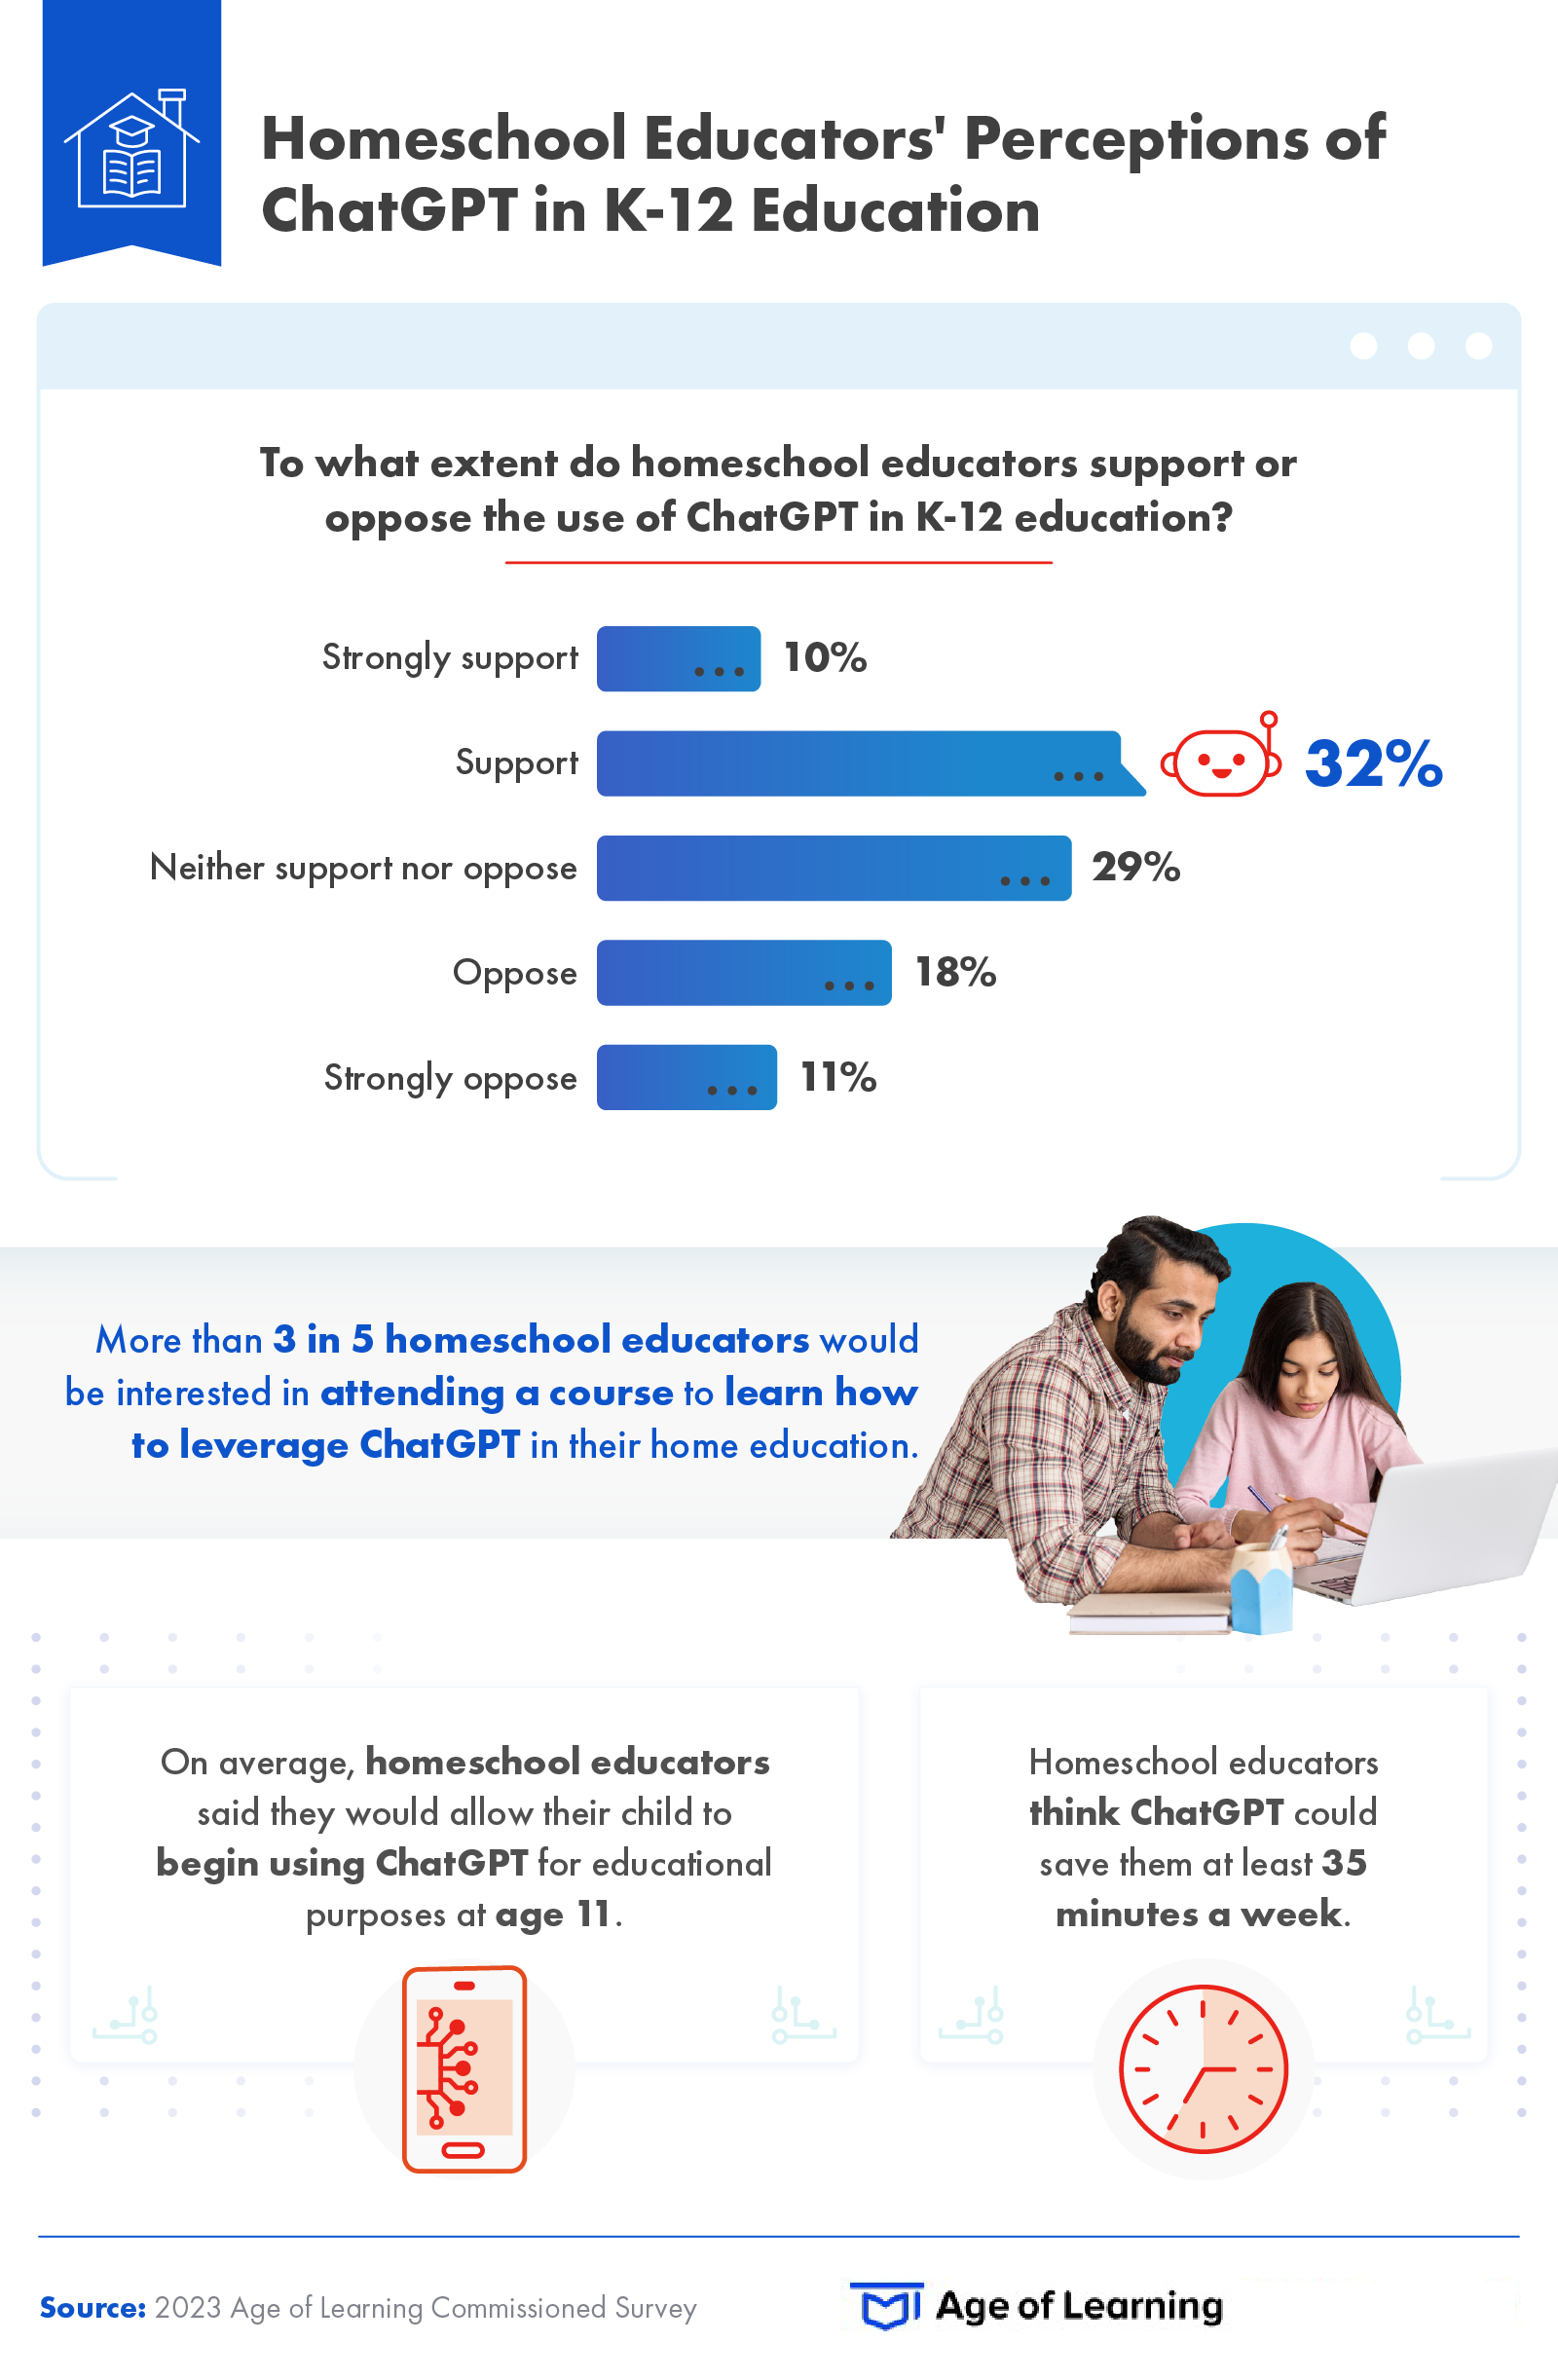 This infographic explores homeschool educators support of ChatGPT in K-12 education. 